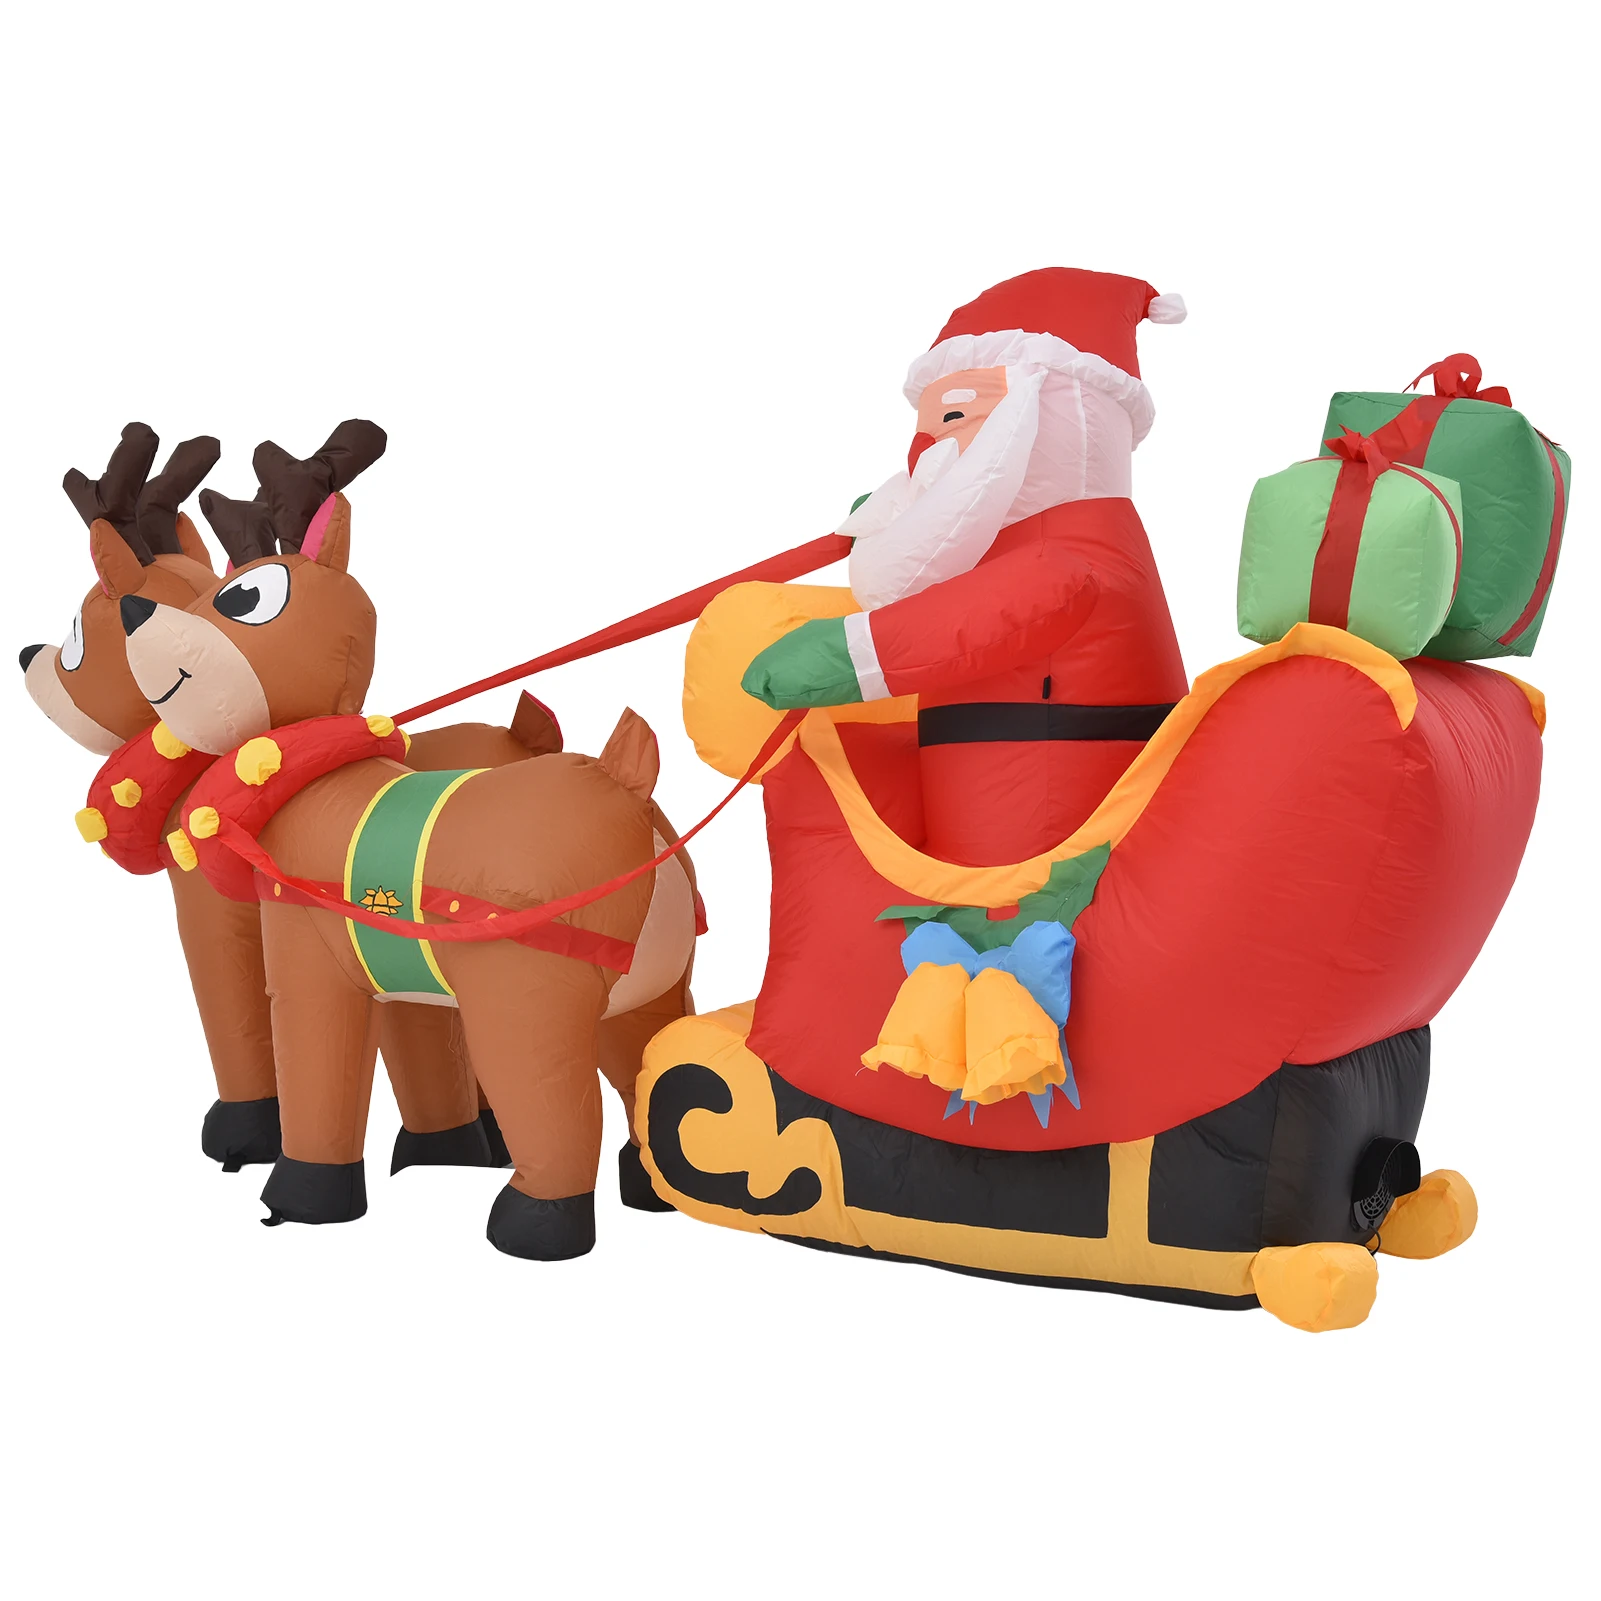 

6ft Christmas Blow Up Yard Decorations Christmas Inflatables Santa Claus On Sleigh With 2 Reindeer Holiday Outdoor Inflatable